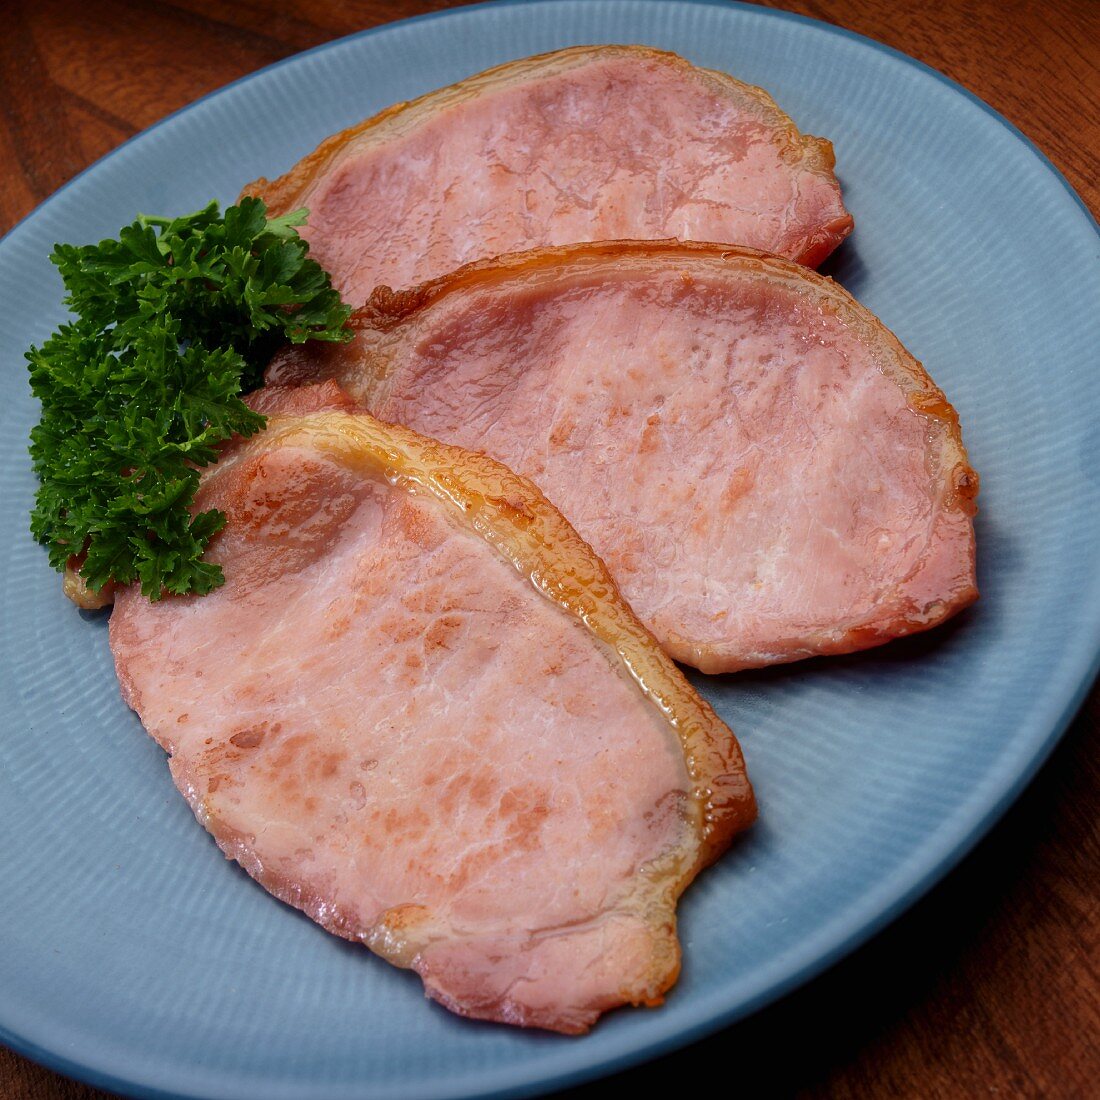 Fried English style bacon on plate